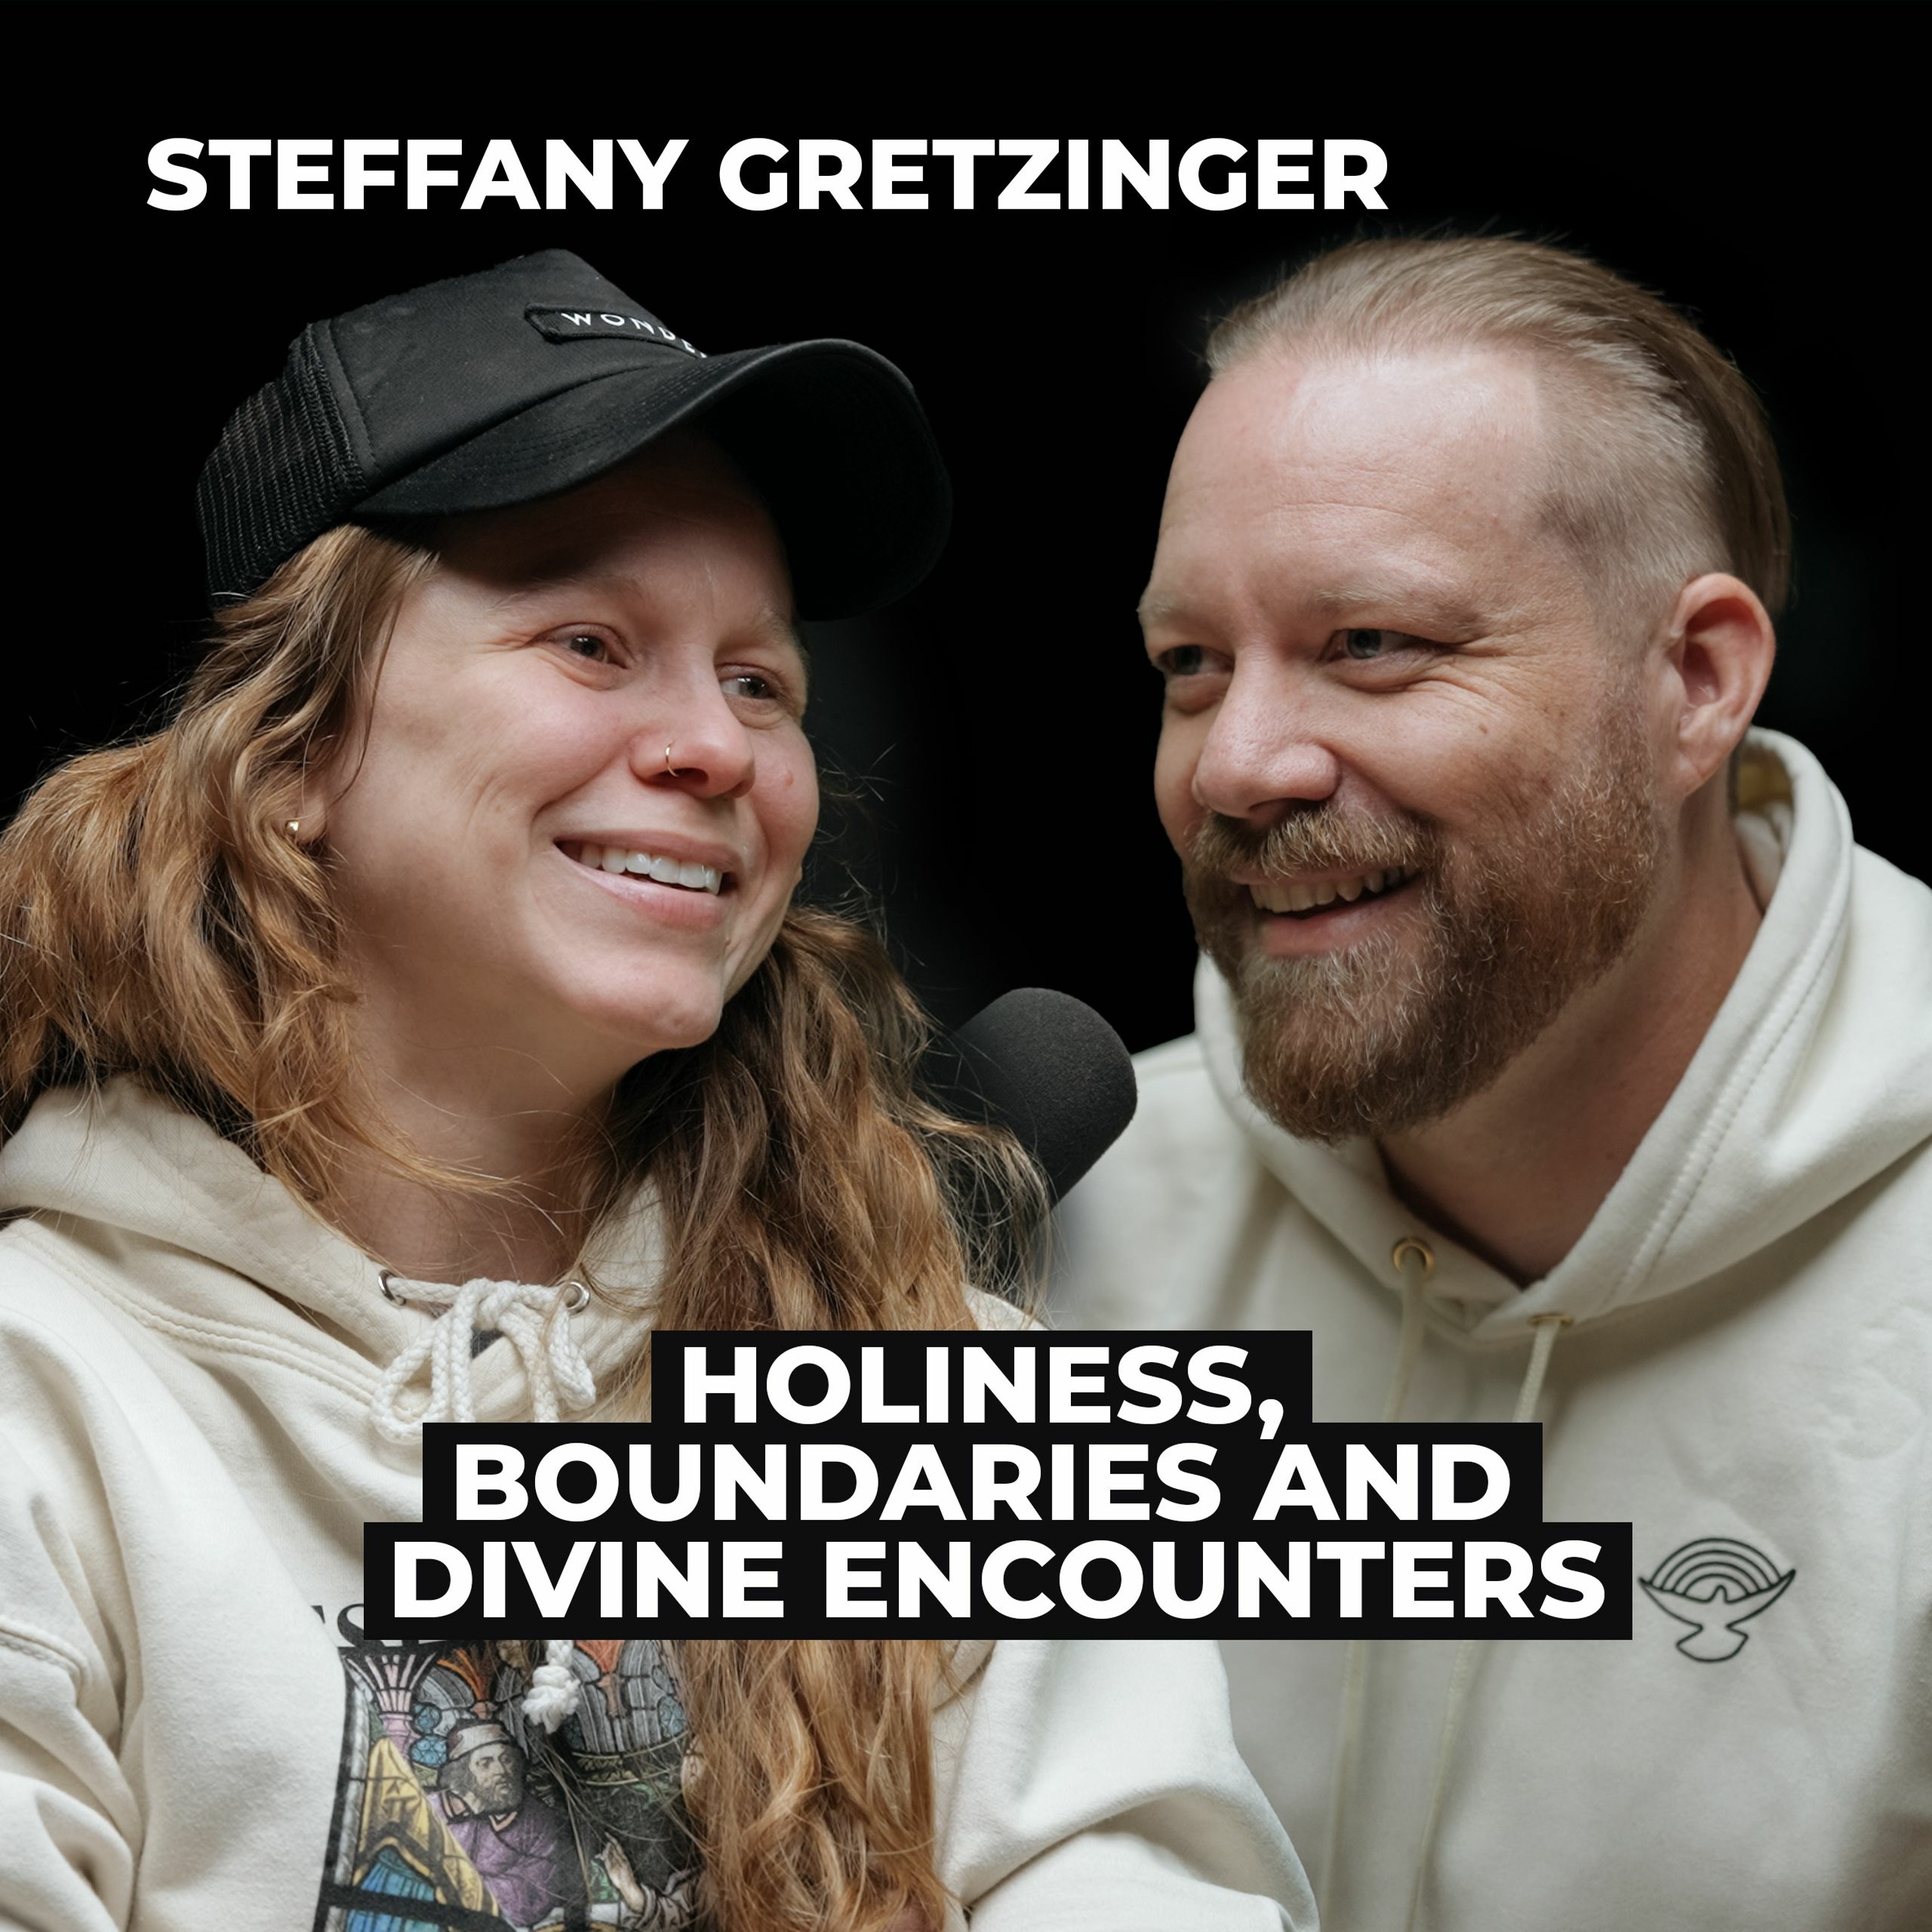 Steffany Gretzinger: Holiness, Boundaries, and Divine Encounters